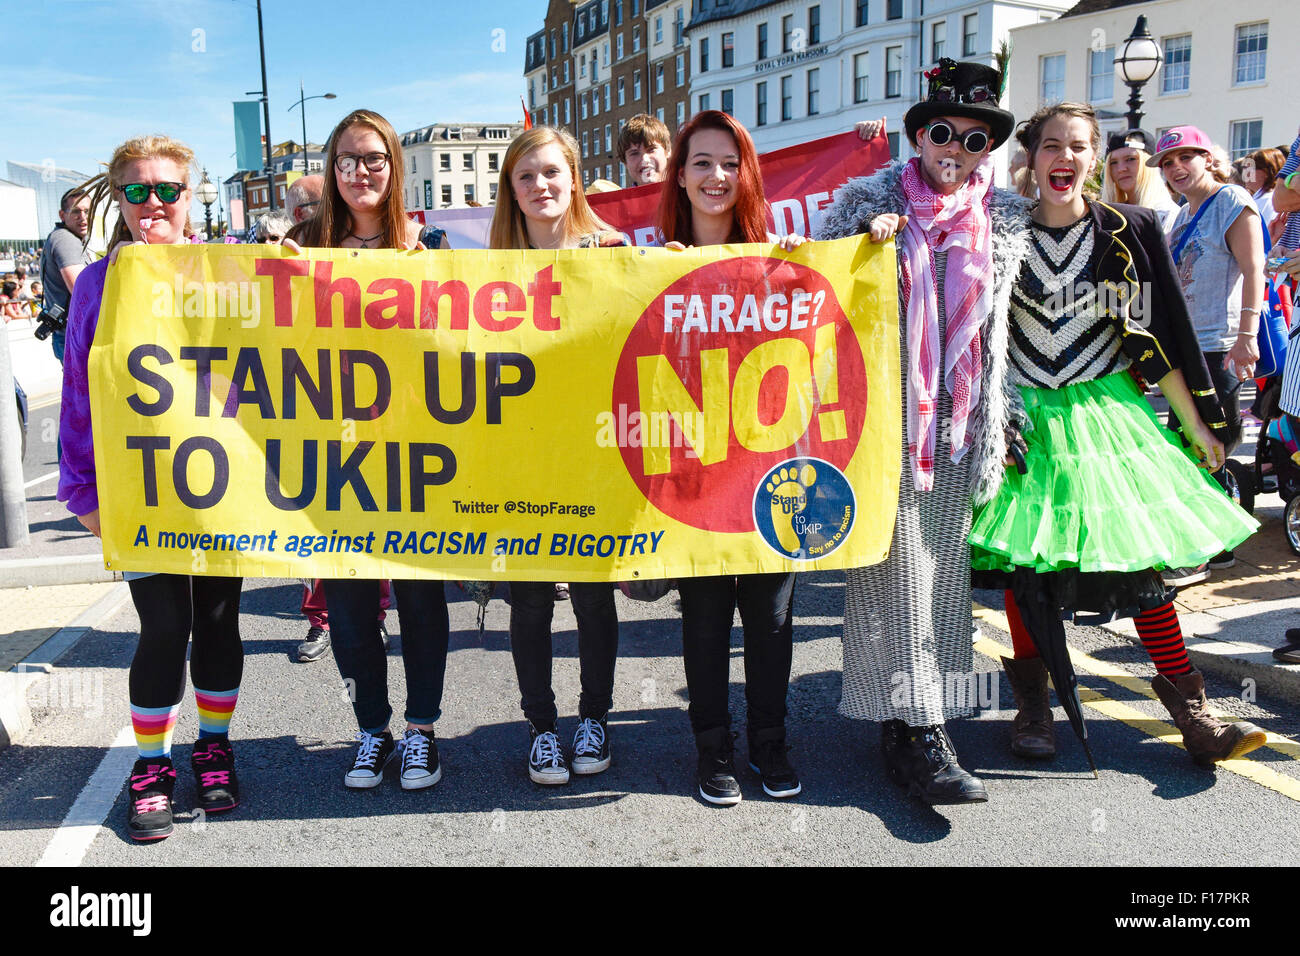 Margate, Kent, UK. 29th August, 2015. Young people carrying an anti-UKIP banner participate in the Kent Pride march in the seaside town of Margate. Alamy Live News/Photographer: Credit:  Gordon Scammell Stock Photo